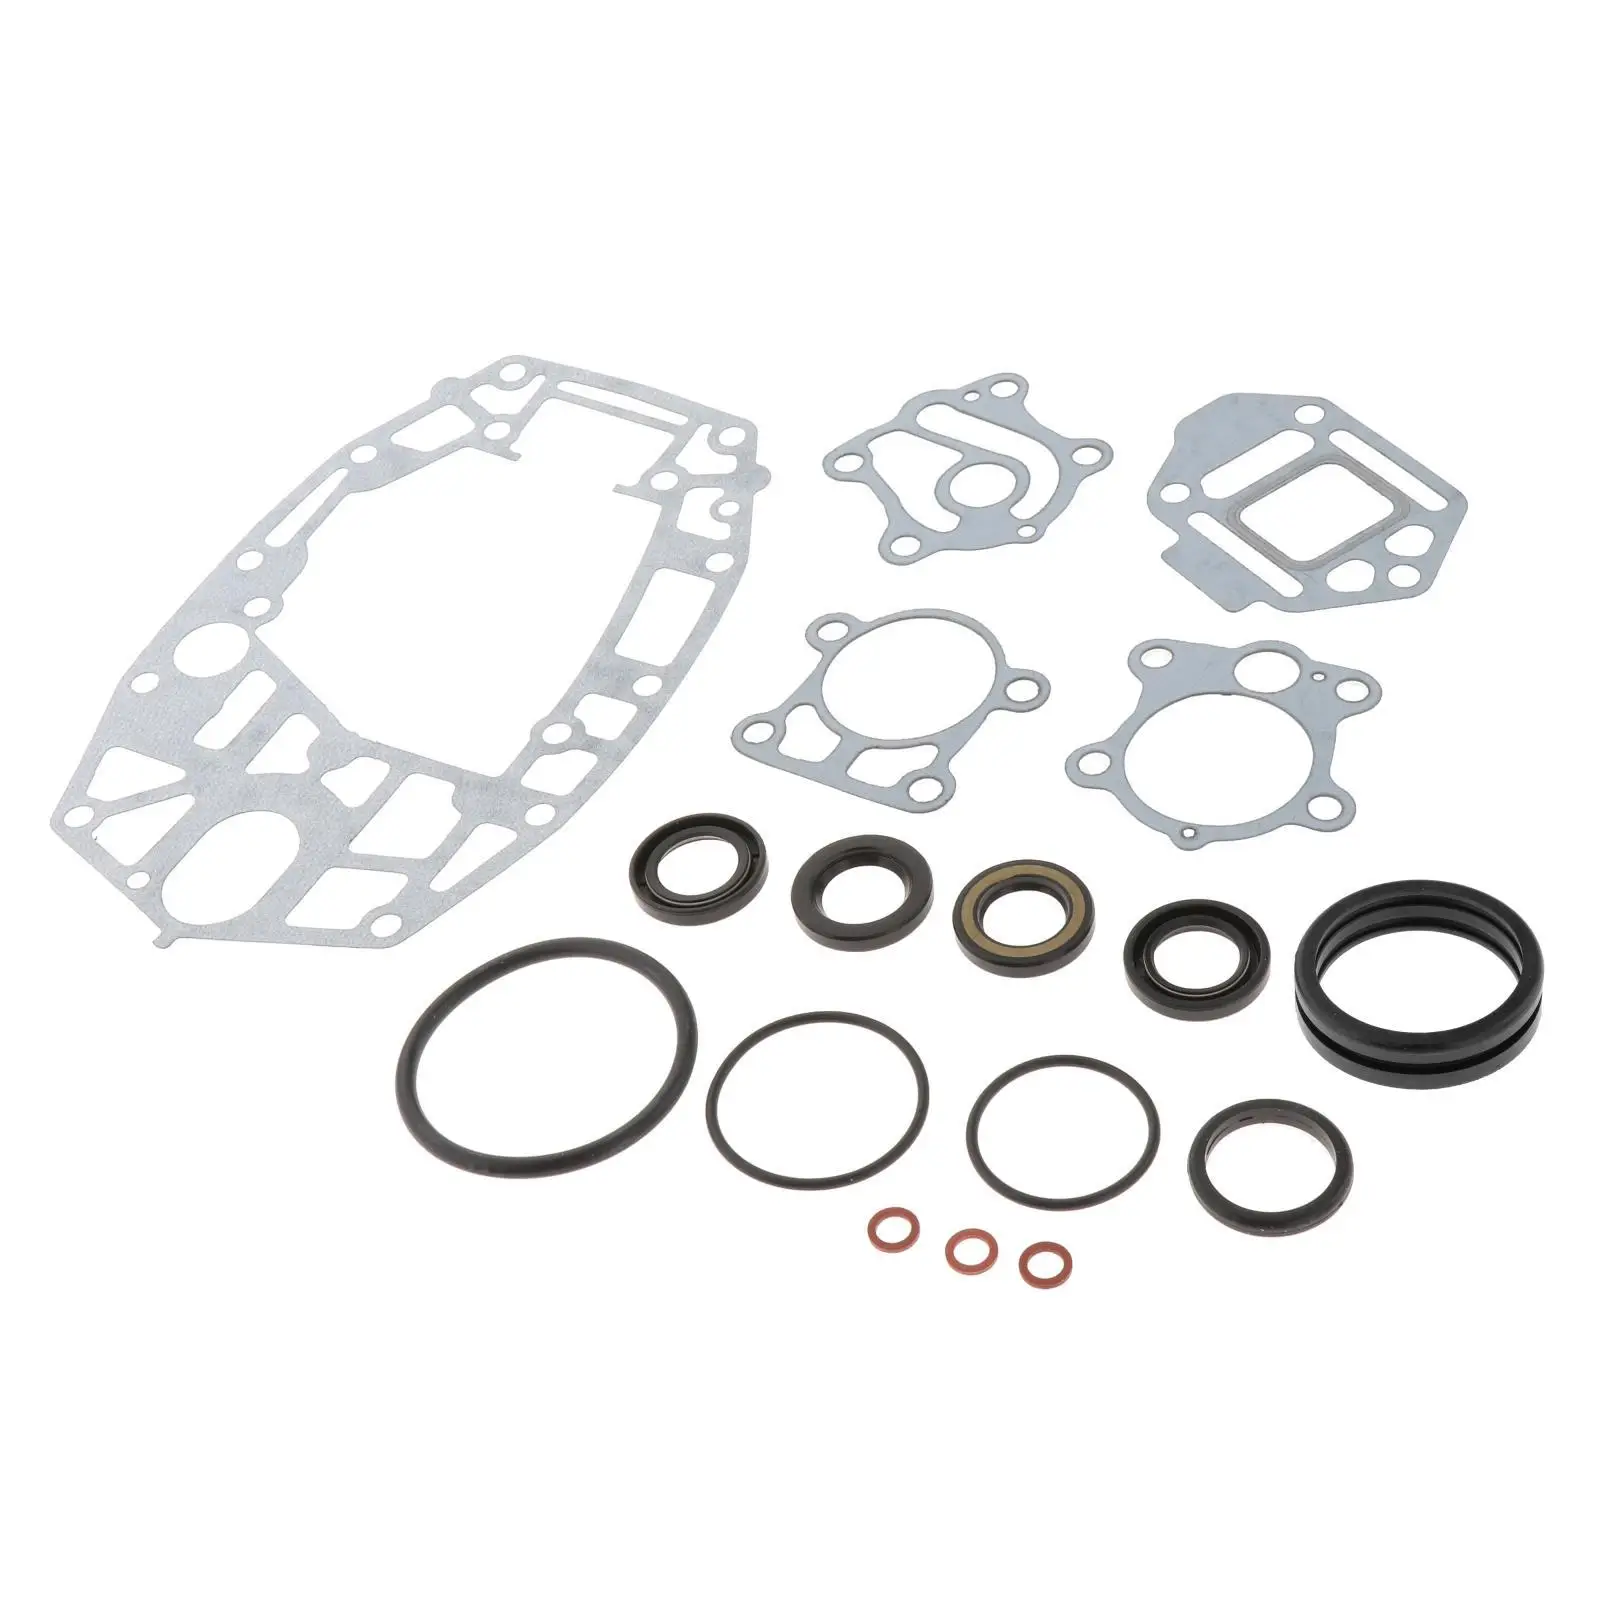 6H4-W0001-20-00 Lower Unit Seal Kit 18-2792 Fit for Yamaha Parts Oil Seal